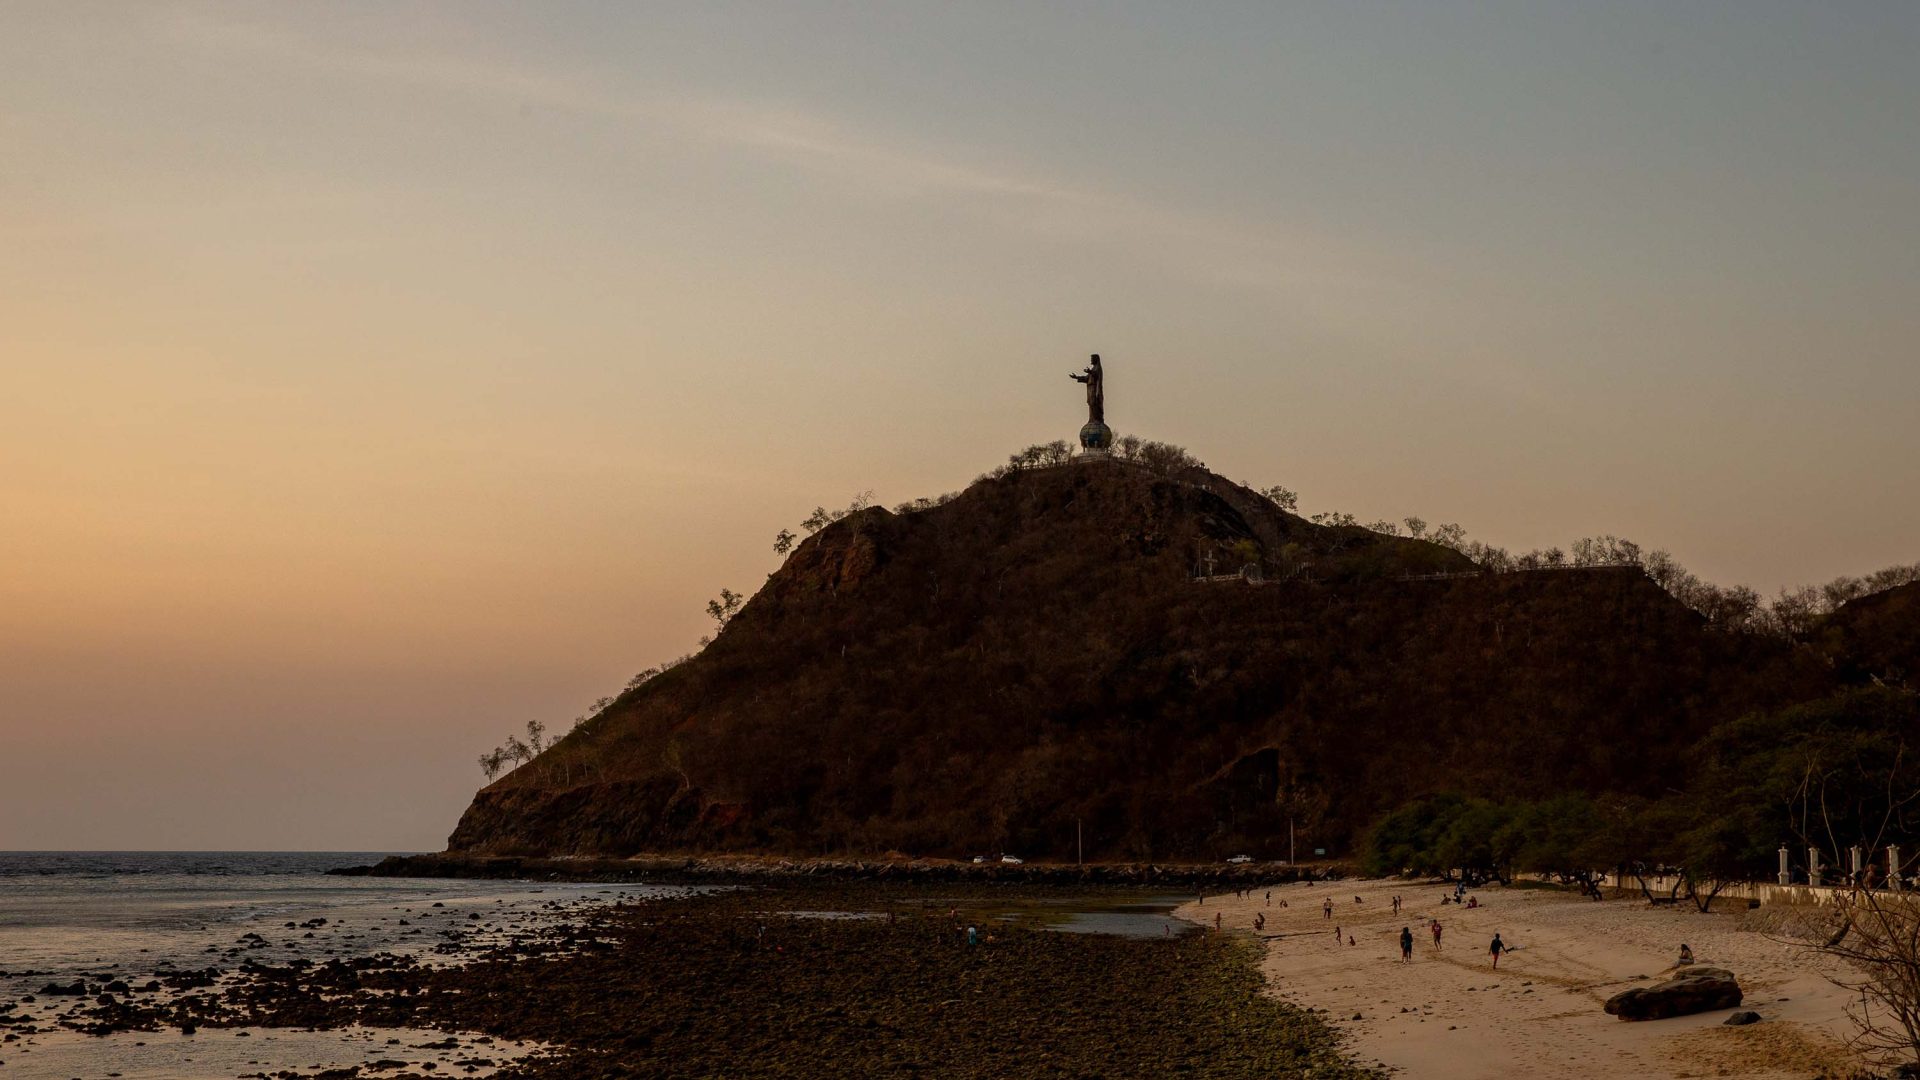 The soft light of dusk over a mountain with a statue of Christ at its summit.